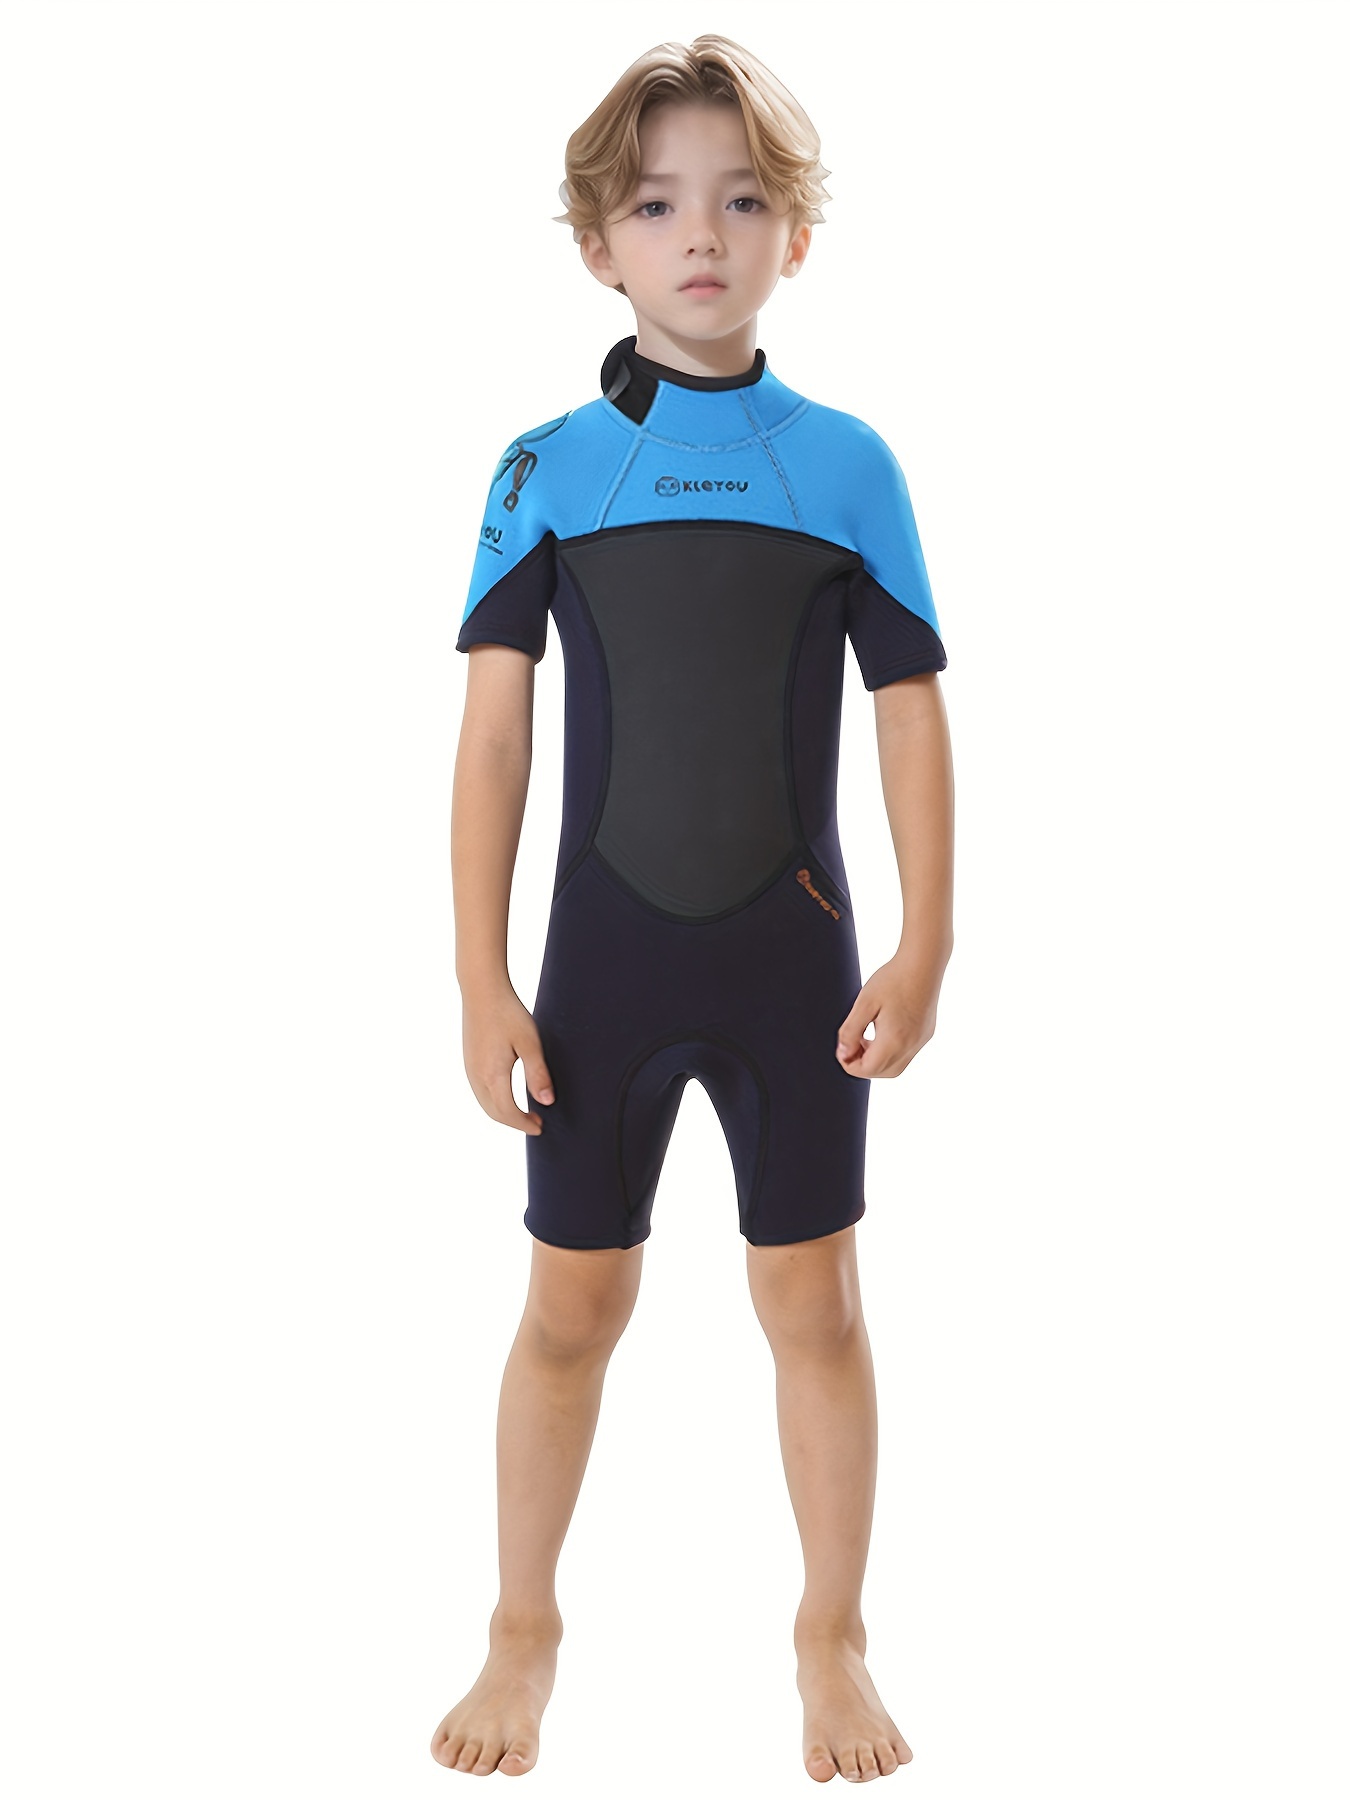 Kids Thermal Swimsuit, 2.5mm Childrens Beautiful Stretch Wetsuit